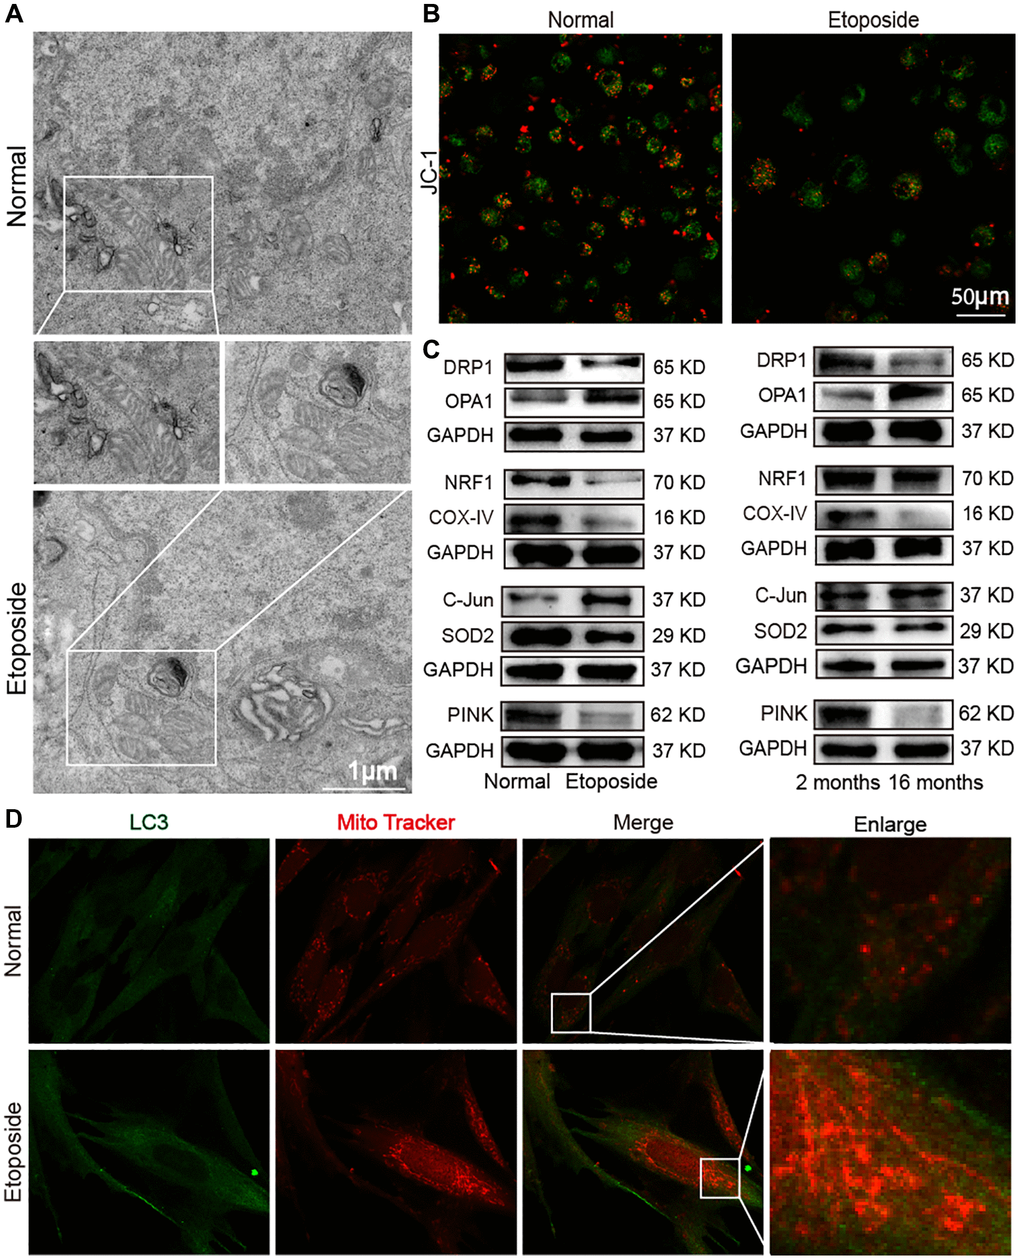 Dysfunctional mitochondria in the aging model in vivo and in vitro. (A) TEM examination showed mitochondrial crumpling, disrupted integrity of the outer mitochondrial membrane, and reduced mitochondrial cristae in the aging group. (B) Detection of mitochondrial membrane potential by laser scanning confocal microscopy revealed decreased red fluorescence and increased green fluorescence in senescent cells. Red fluorescence indicated JC-1 polymer; green fluorescence indicated JC-1 monomer. (C) Western blot showed increased expression levels of OPA1 and C-Jun in the senescent cell model and decreased expression levels of DRP1, NRF1, COX-IV, SOD2, and PINK with the same expression trend in the aging mice model. (D) Double immunofluorescence assay showed increased mitochondria (red fluorescence) and LC3 (green fluorescence) in senescent cells compared with normal ones. Mitochondria in the normal group showed an extended tubular structure, and in the etoposide group mitochondria were rounded and fragmented.